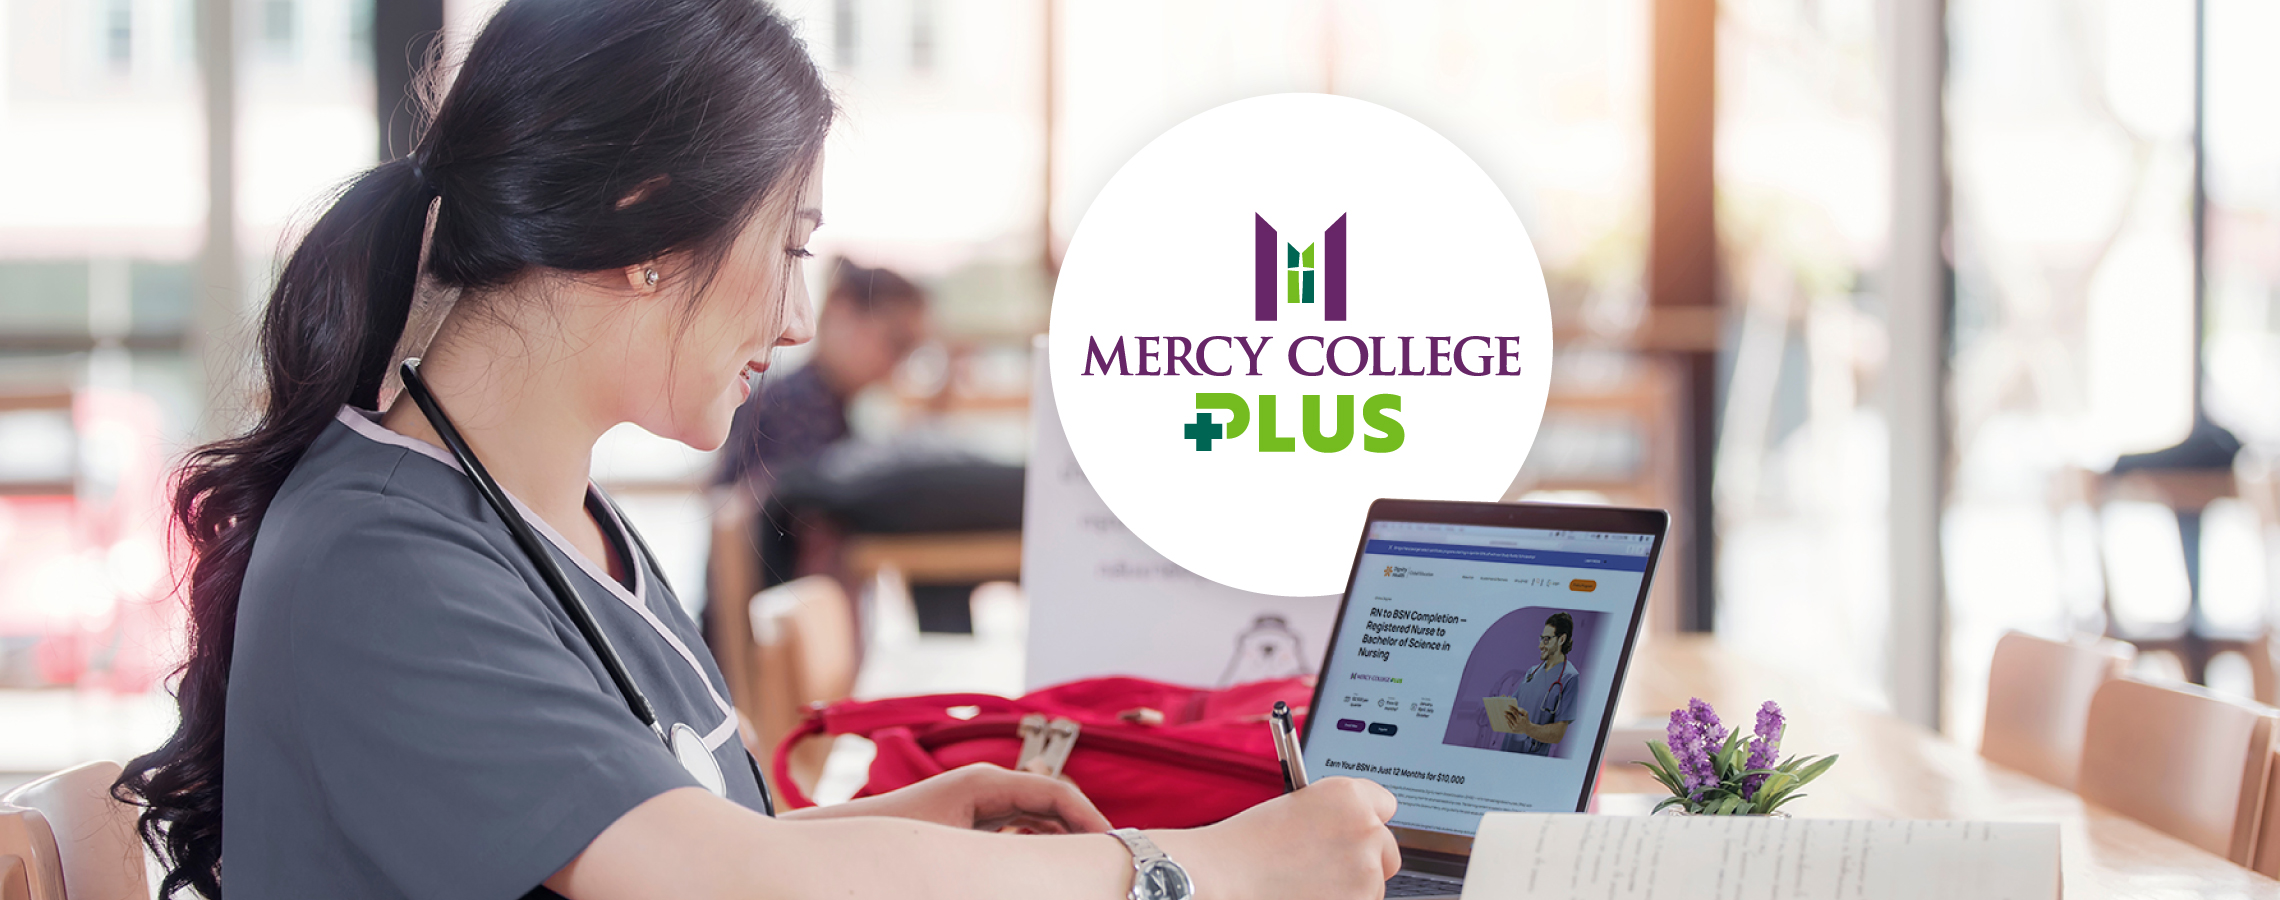 Mercy College PLUS partners with OpusVi to reskill, upskill, and reimagine the healthcare workforce